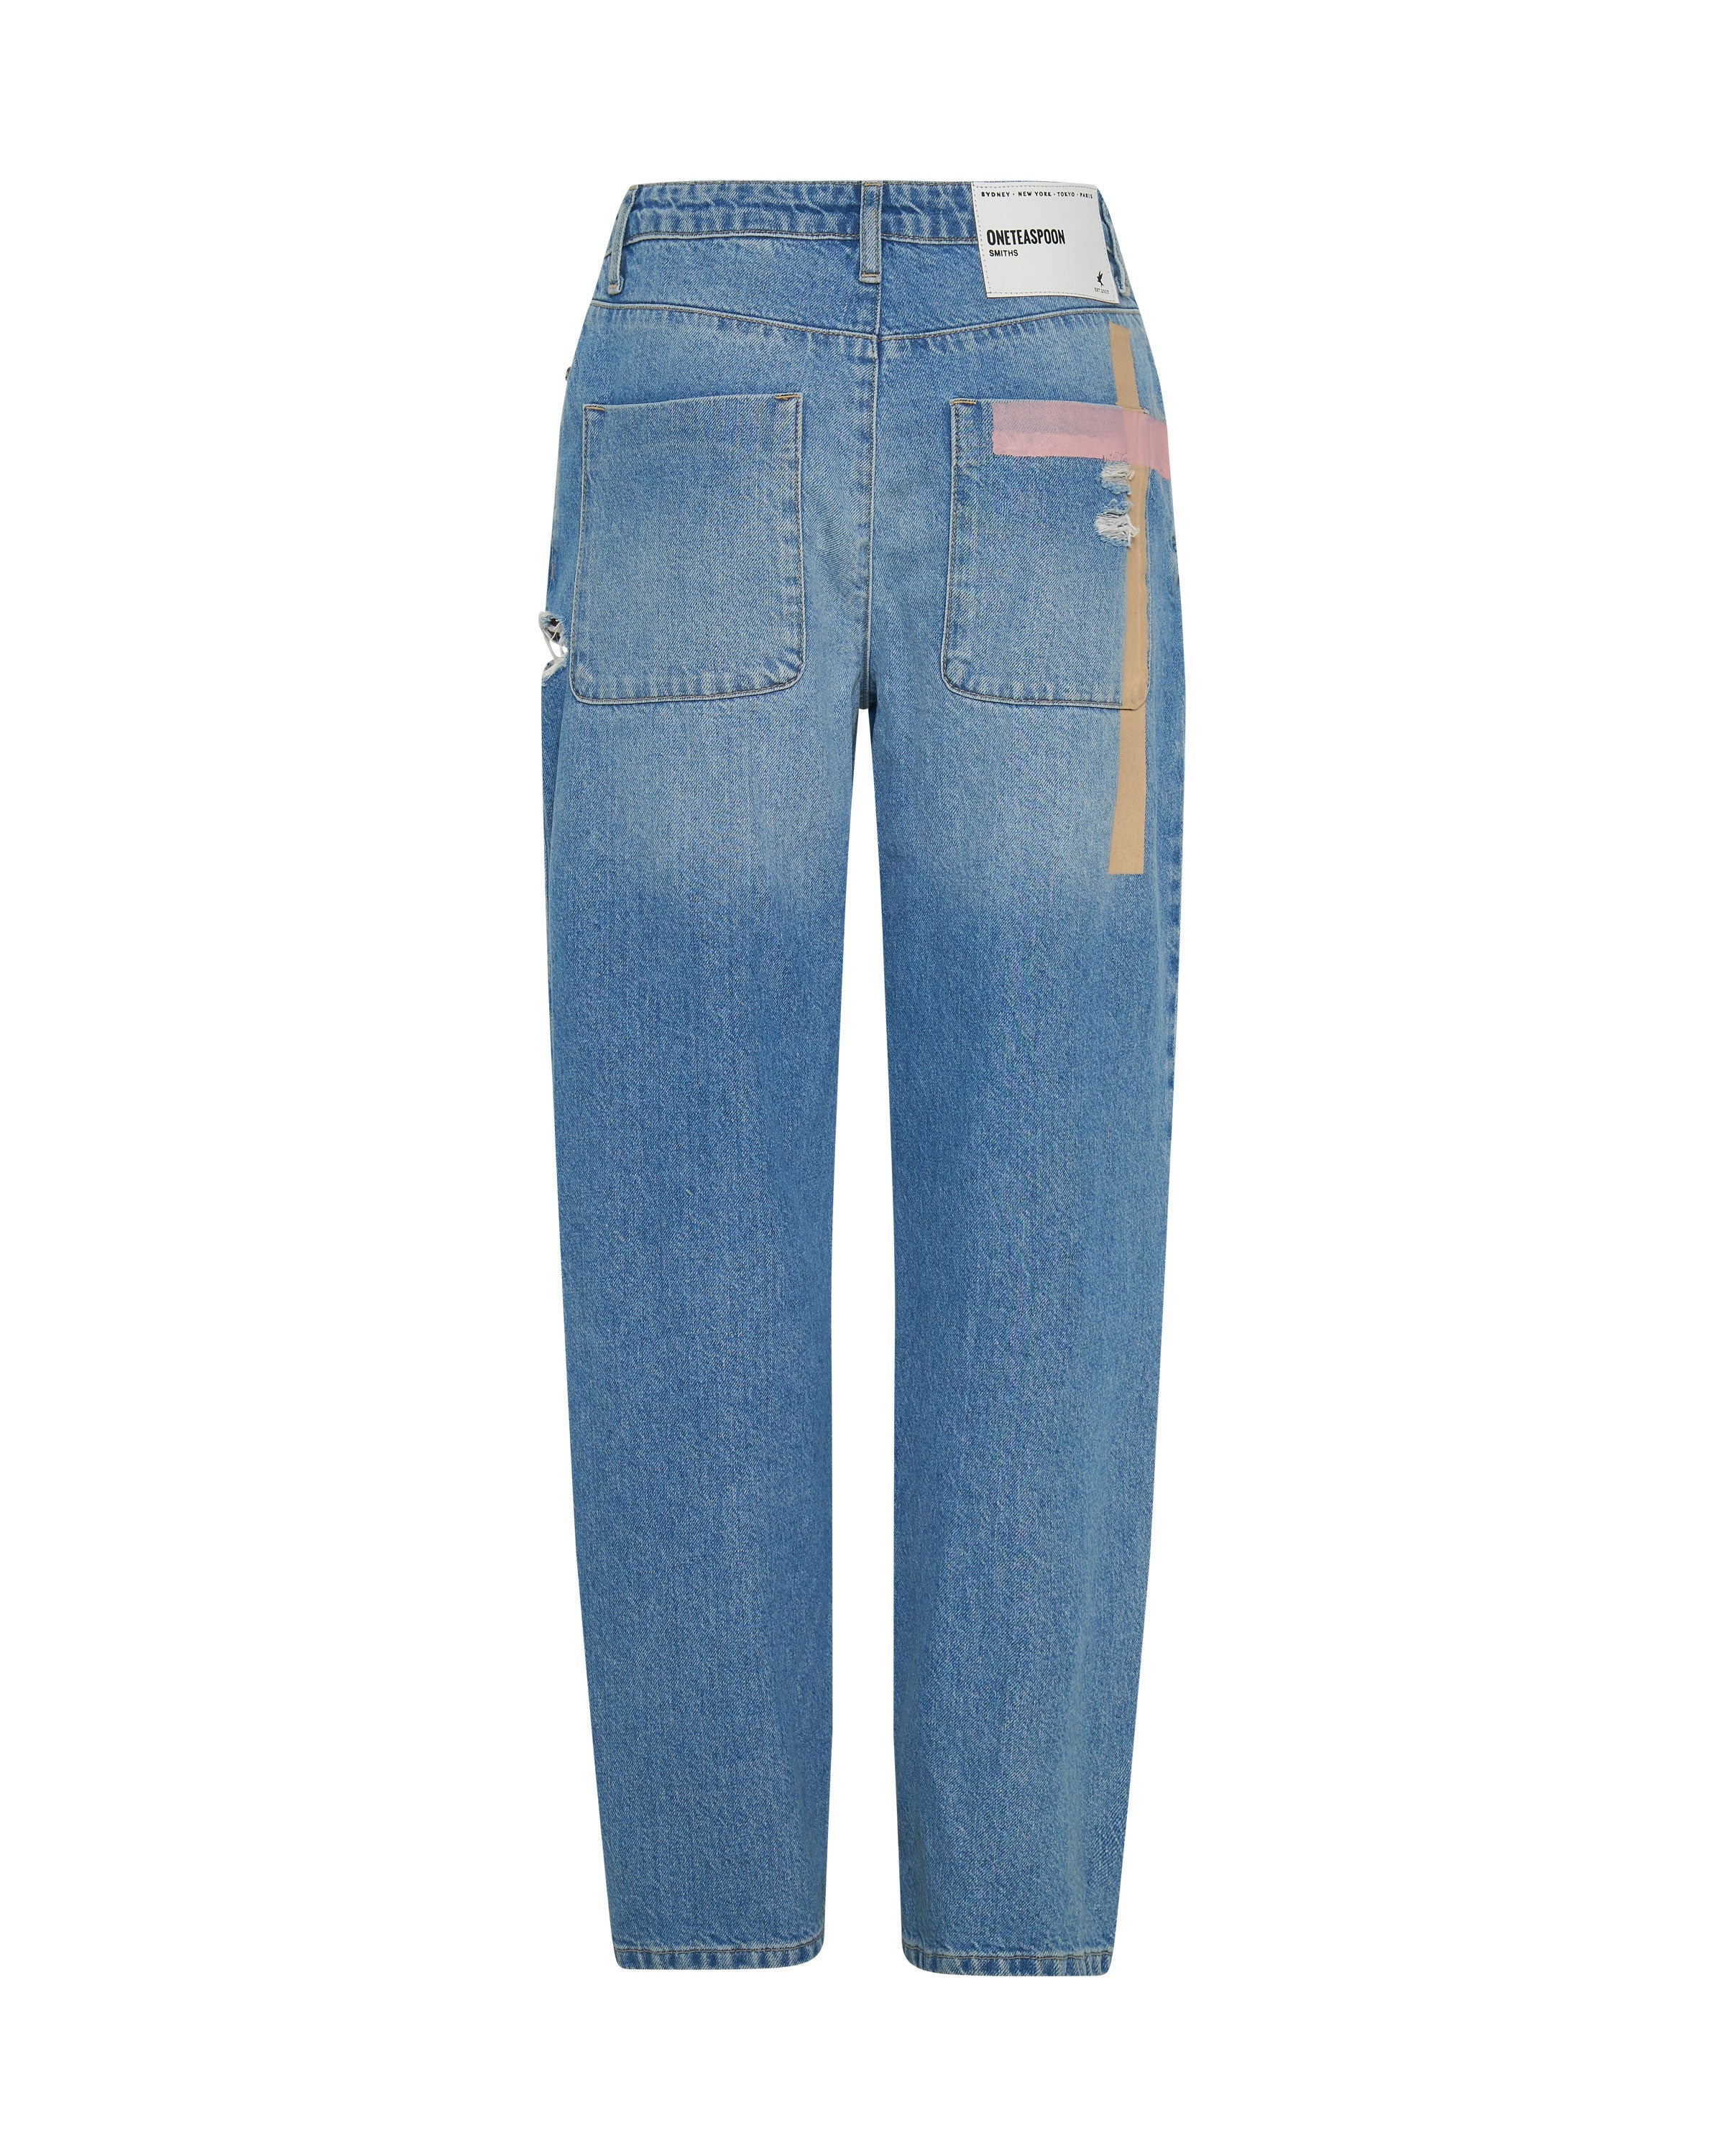 Wide denim trousers - Black/Washed out - Ladies | H&M IN